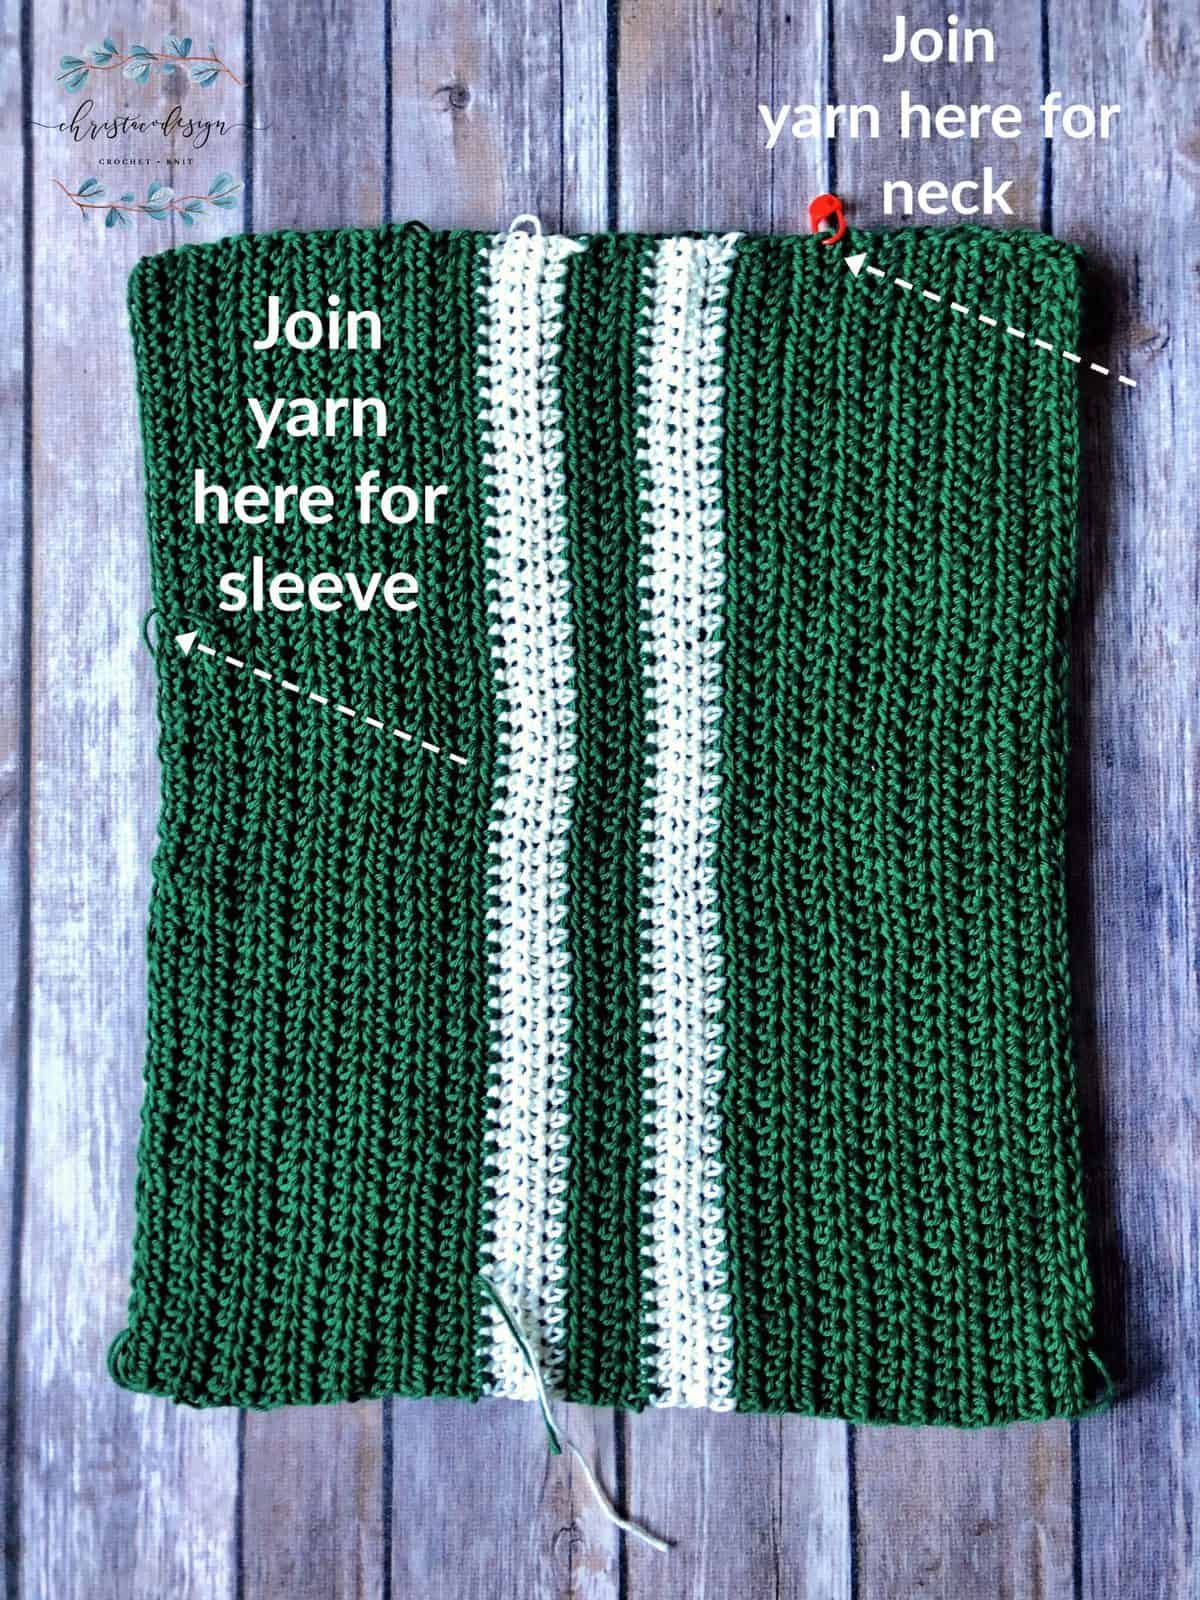 Green Crochet panels with white racing stripes and text labels for joining sleeve and neck.